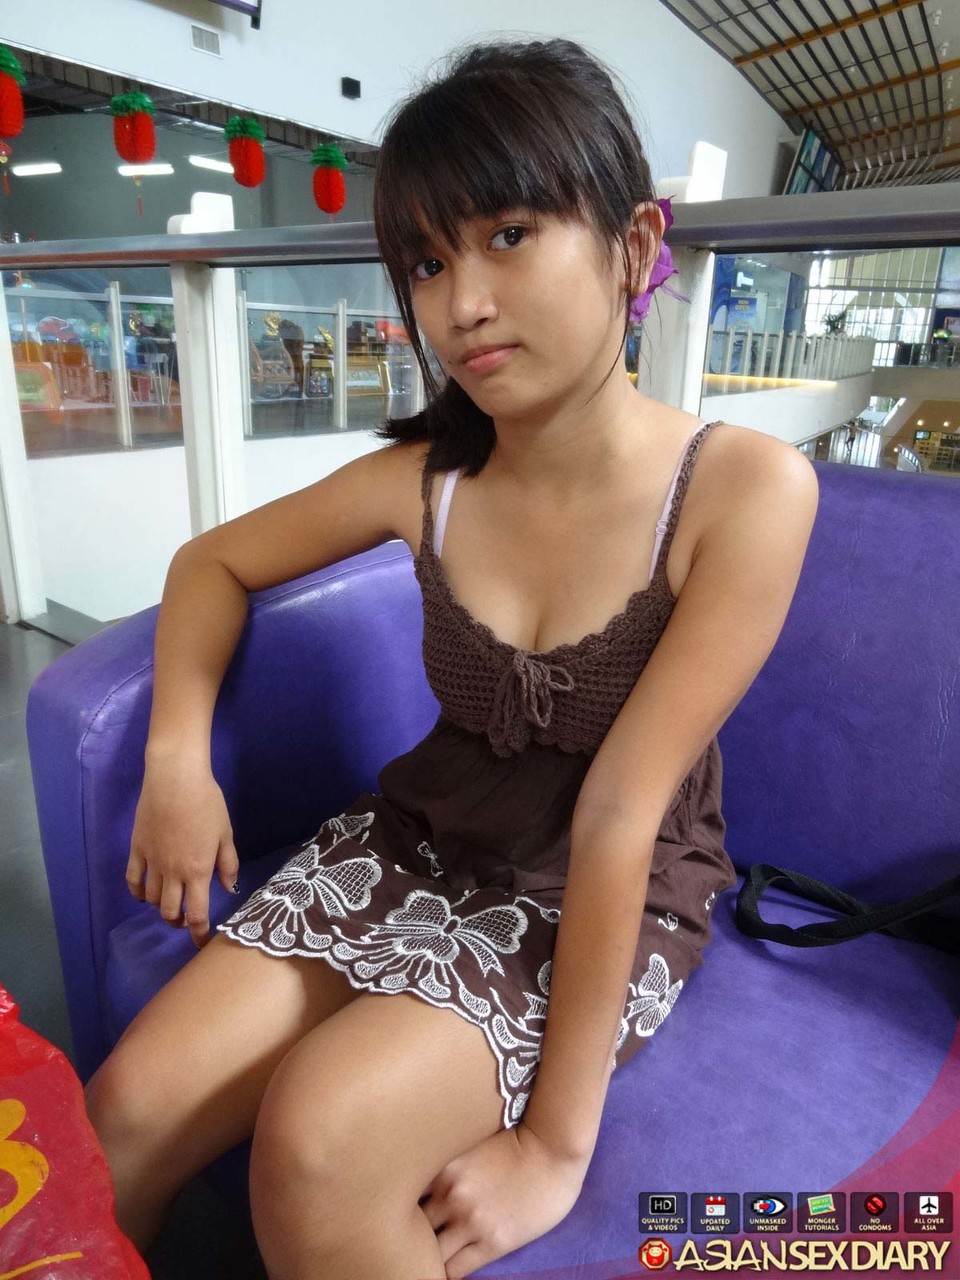 Petite Asian girl Menchie gets naked before having POV sexual relations foto porno #422641351